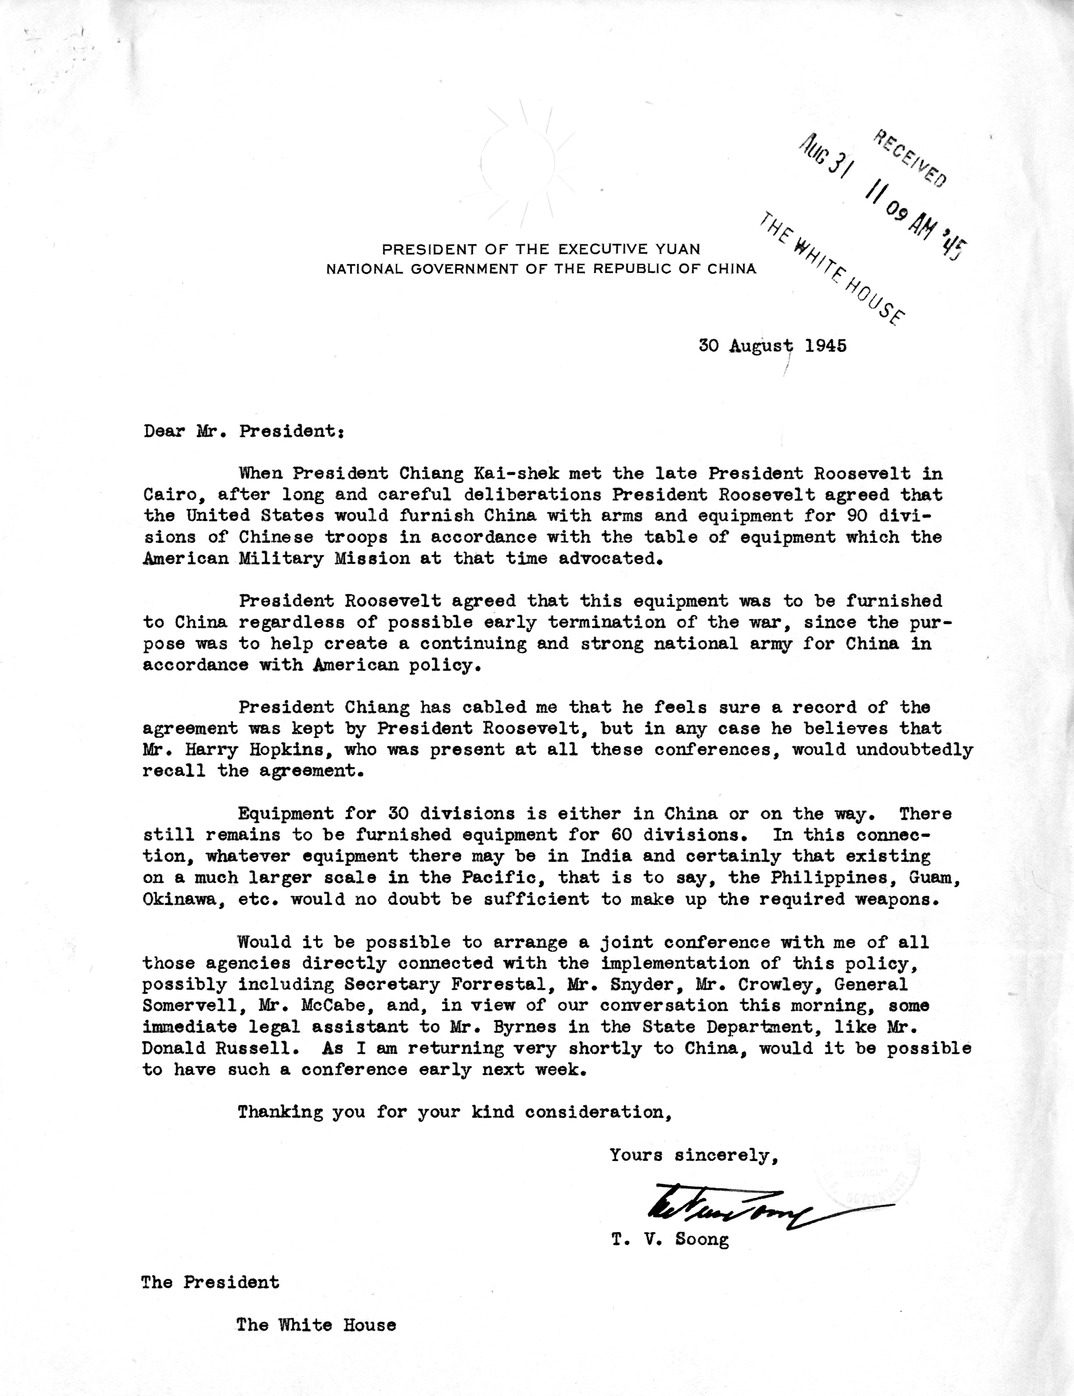 Correspondence from T.V. Soong to President Harry S. Truman